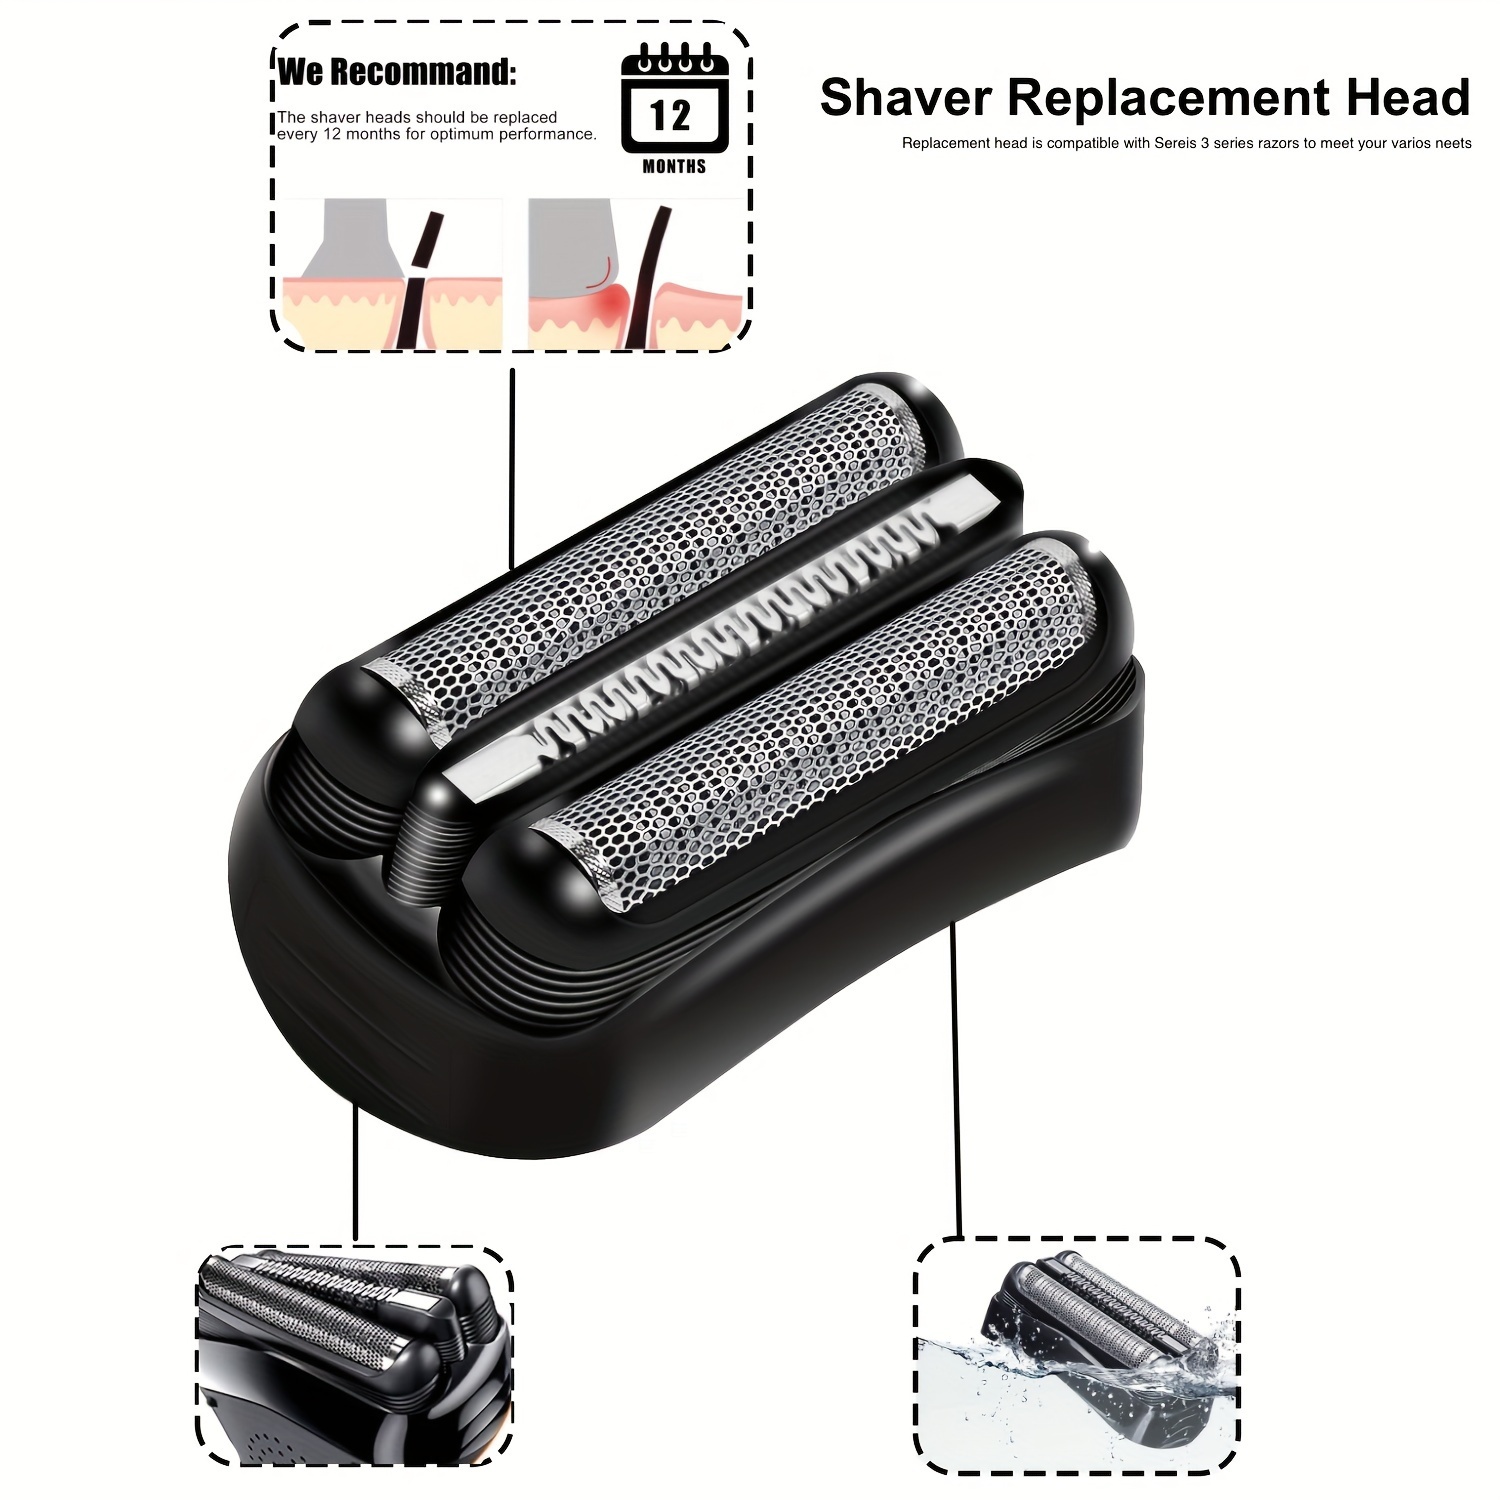 21B Shaver Replacement Head For Braun Series 3 Electric Razors